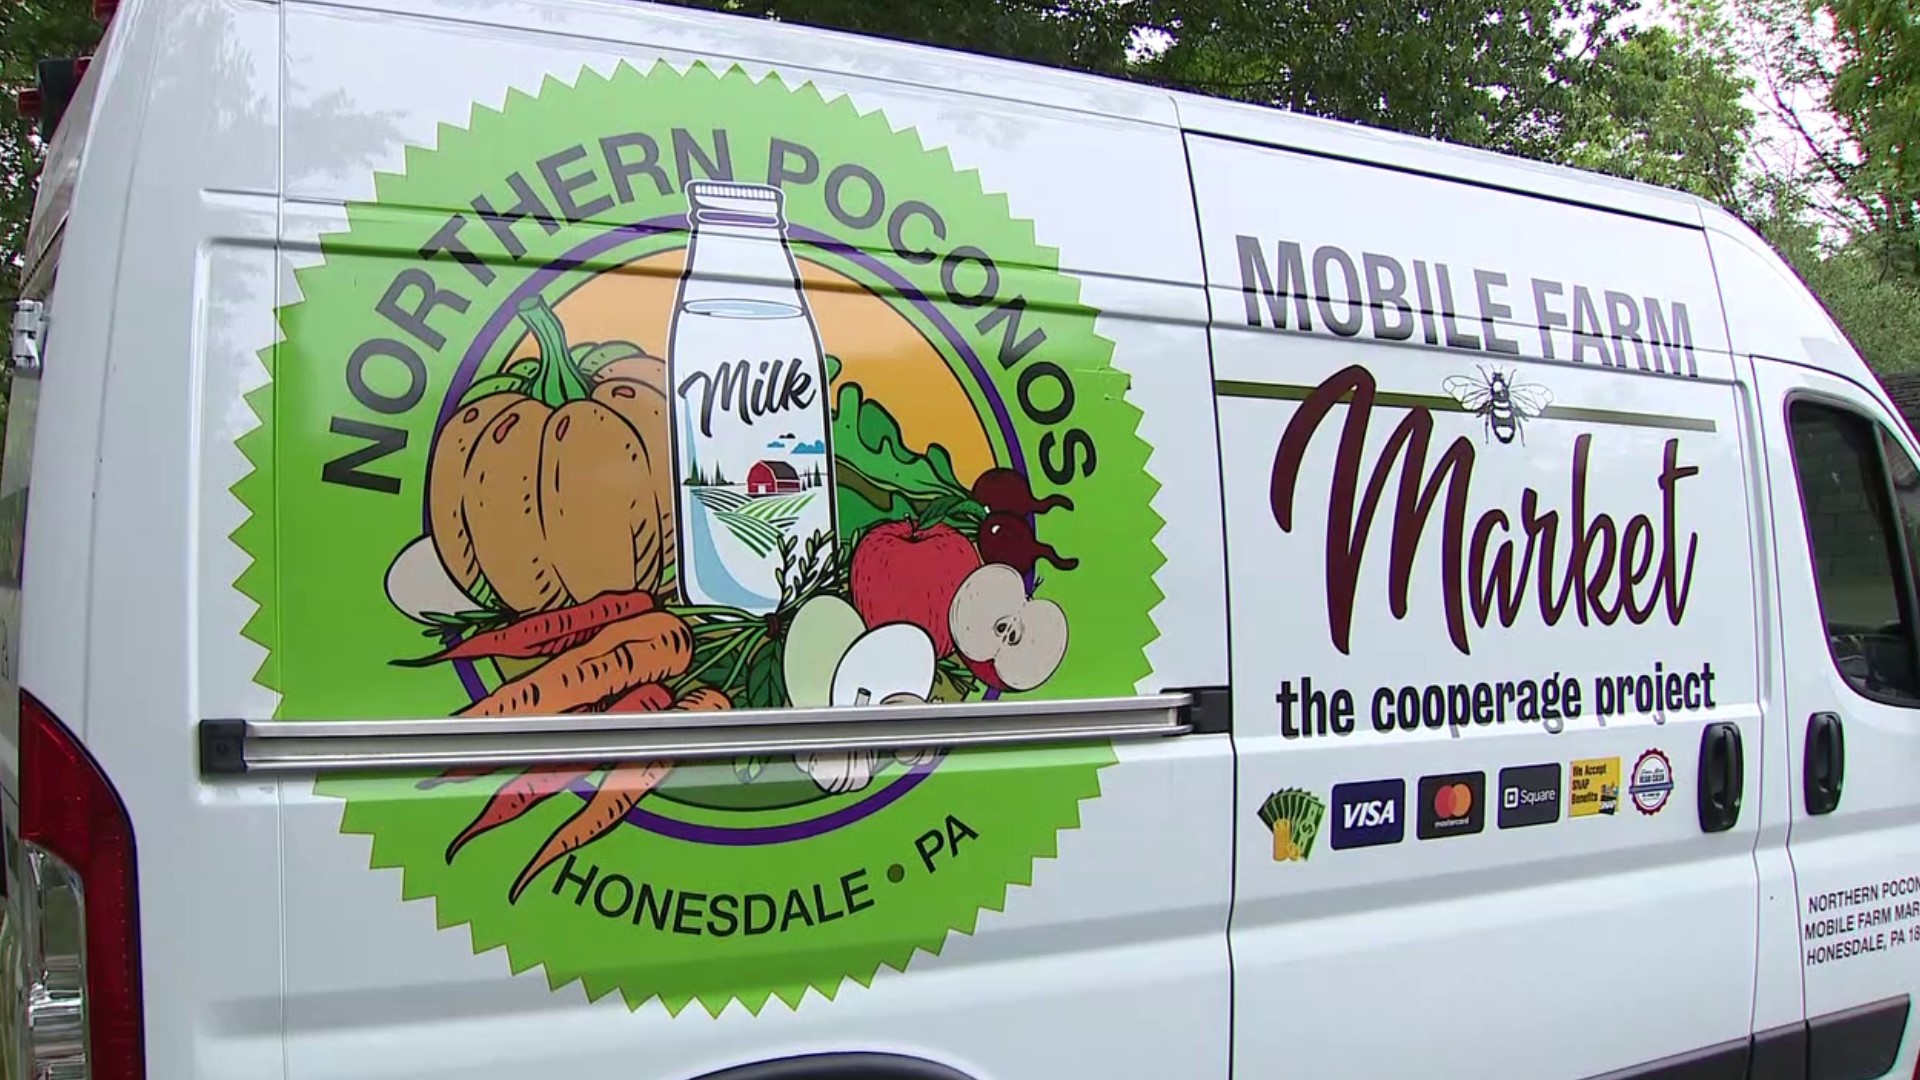 A new farmers market on wheels in Wayne County is helping senior citizens and those in need access fresh food and produce.